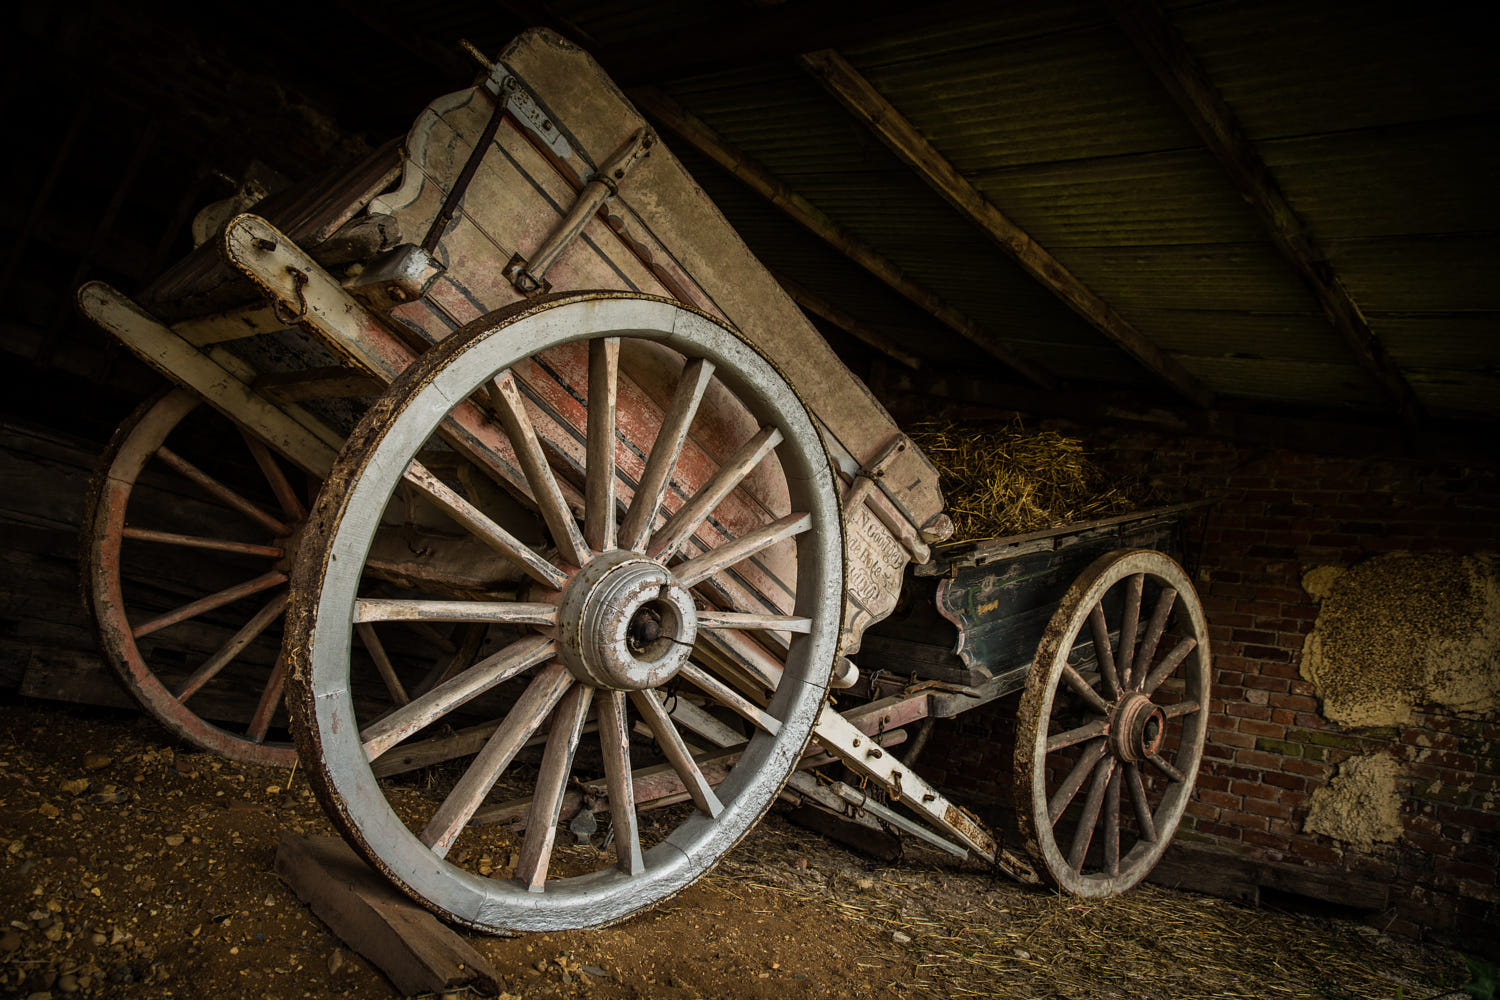 15 vintage photography historic wheels by helen hooker